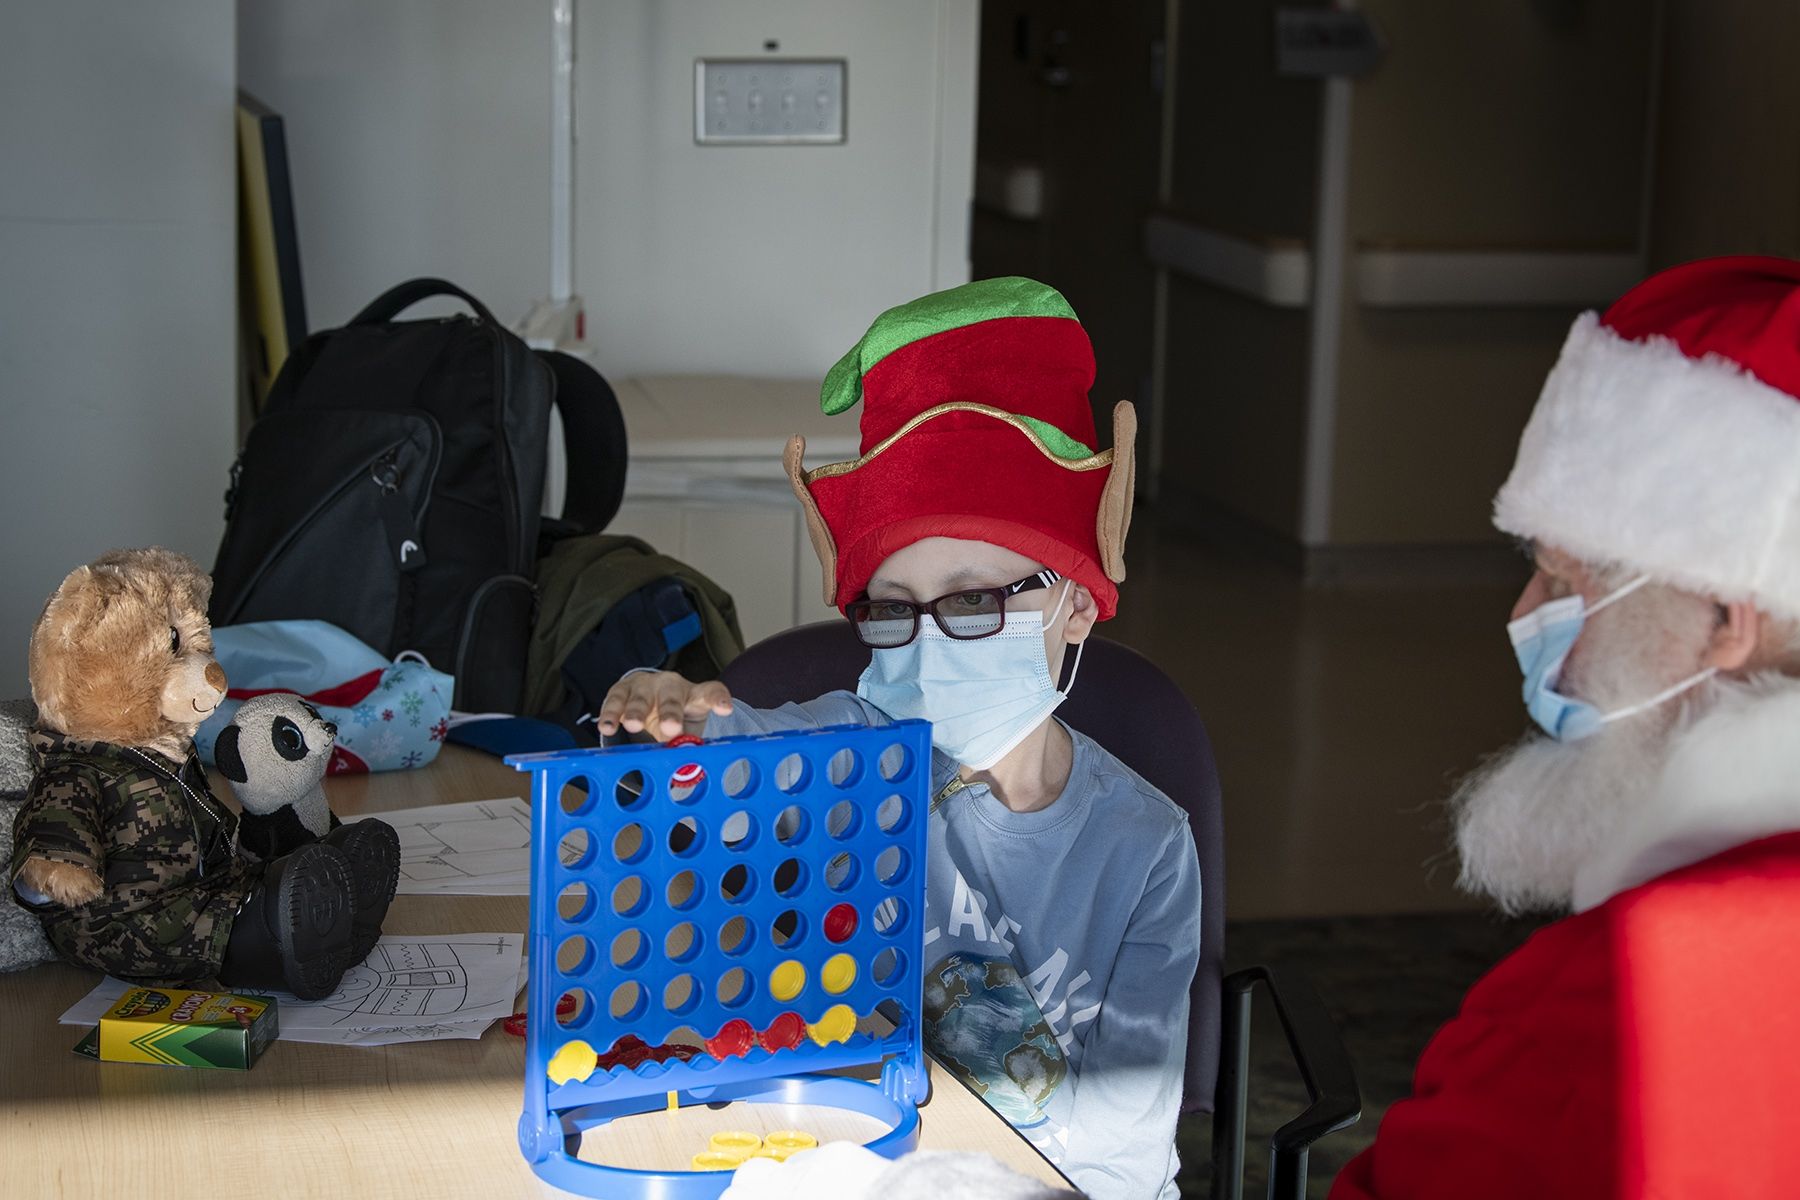 Santa stops for a game of Connect 4 with one of our pediatric patients